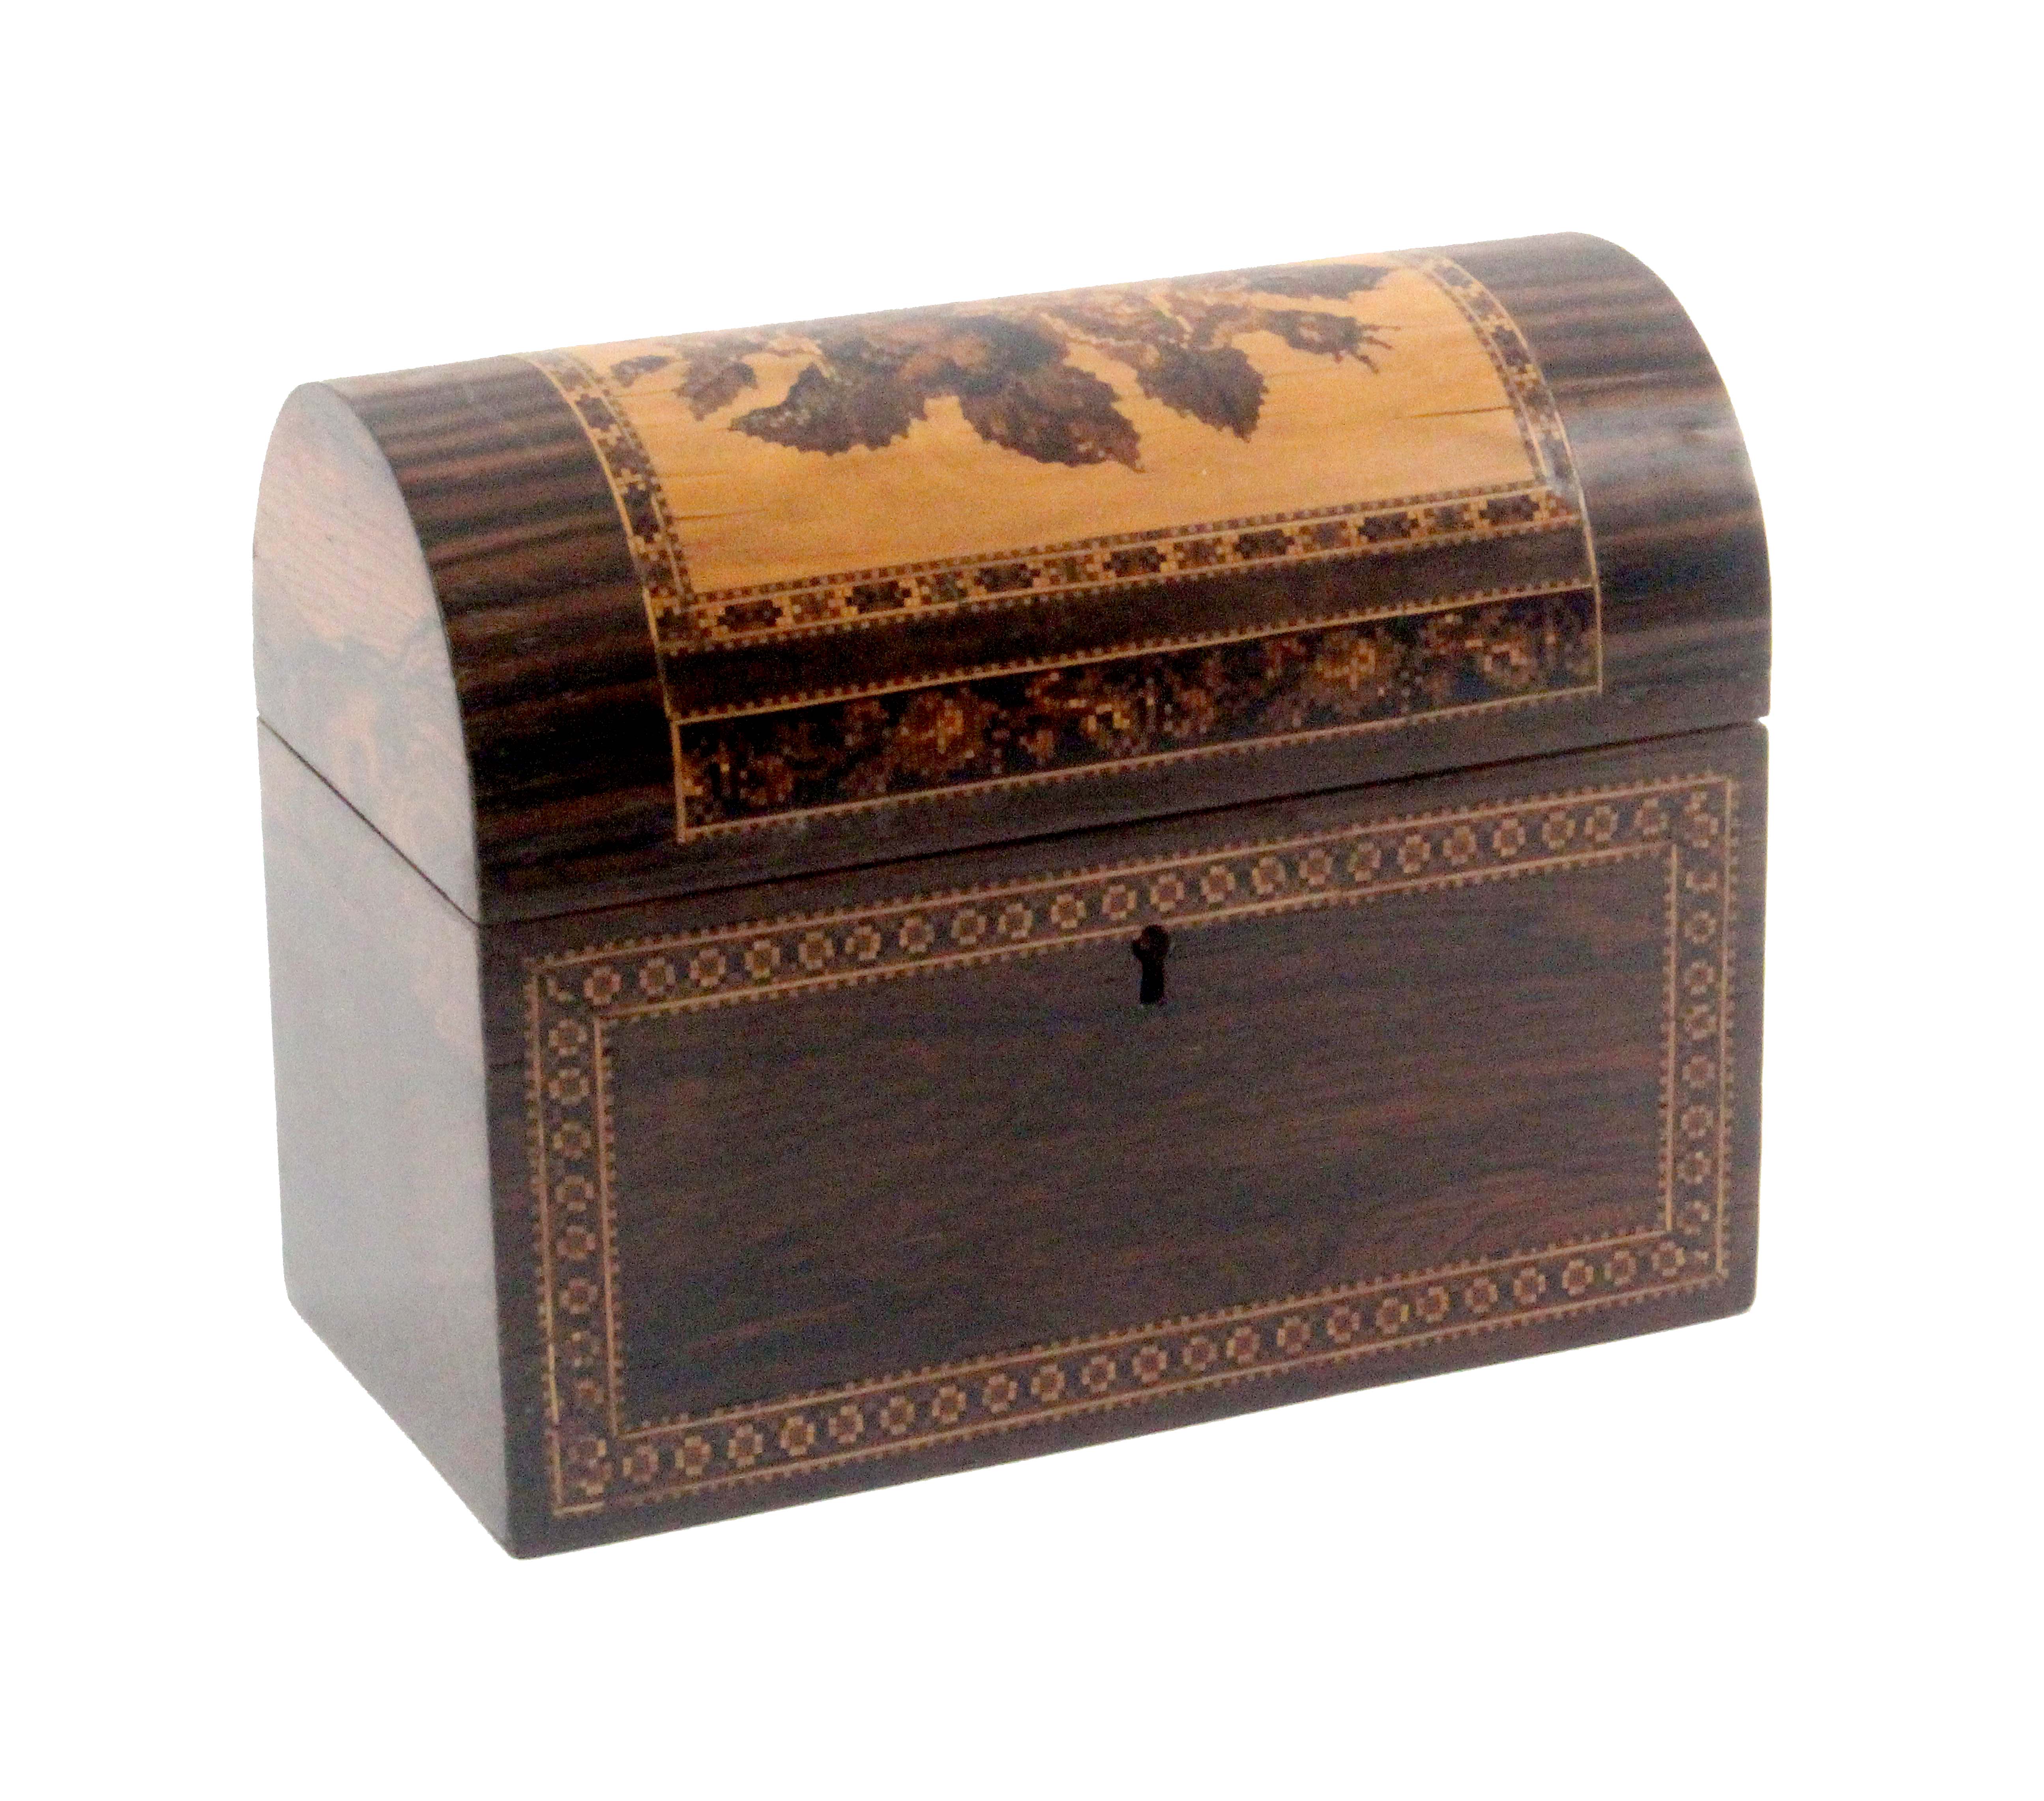 A Tunbridge ware rosewood stationery box, the exaggerated domed lid with an inset panel of floral